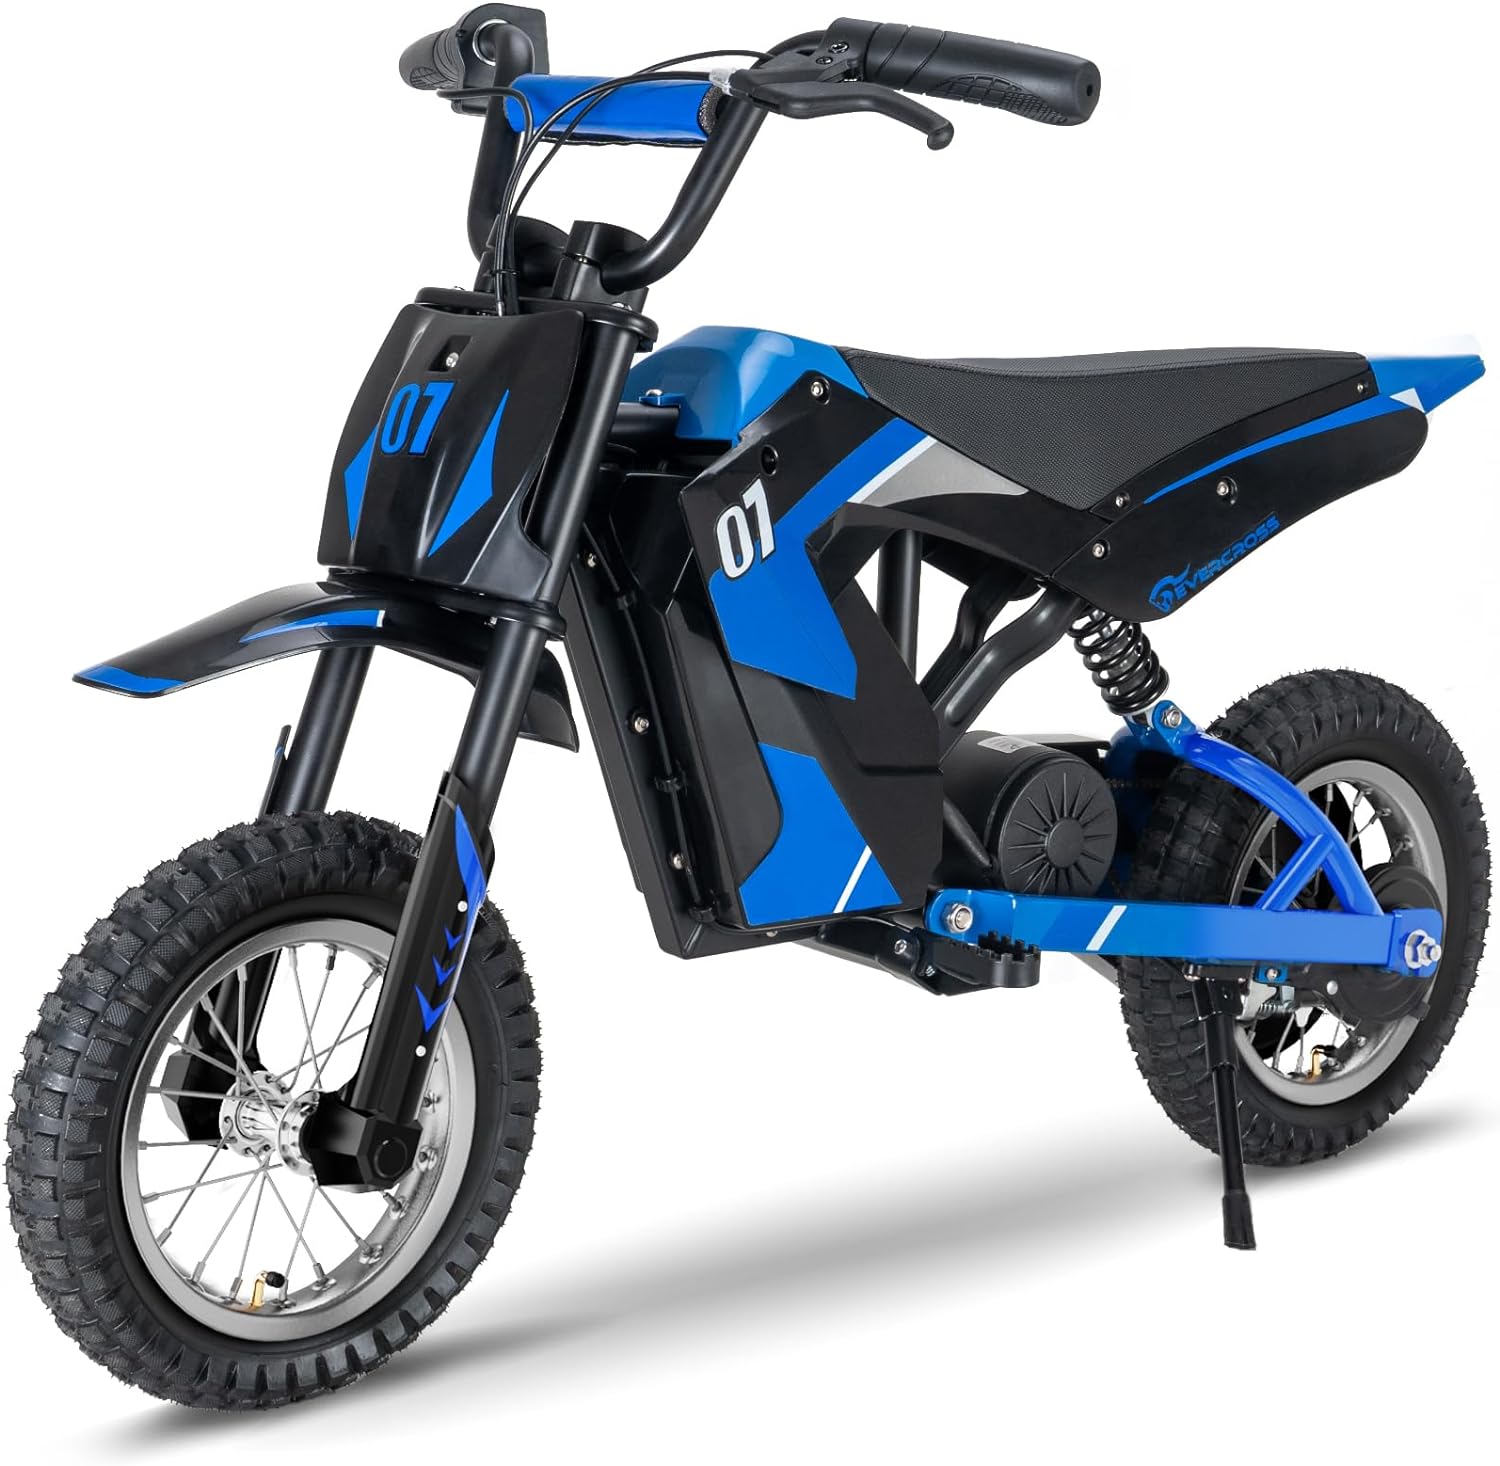 EVERCROSS EV12M Kids Ride On Motorcycle, Electric Motorcycle with 300W Motor, 5/7.5/15.5 MPH Speed Modos, 9.3Miles Long-Range, 12'' Pneumatic Tire, Motor Cross for Ages 3-12 Children